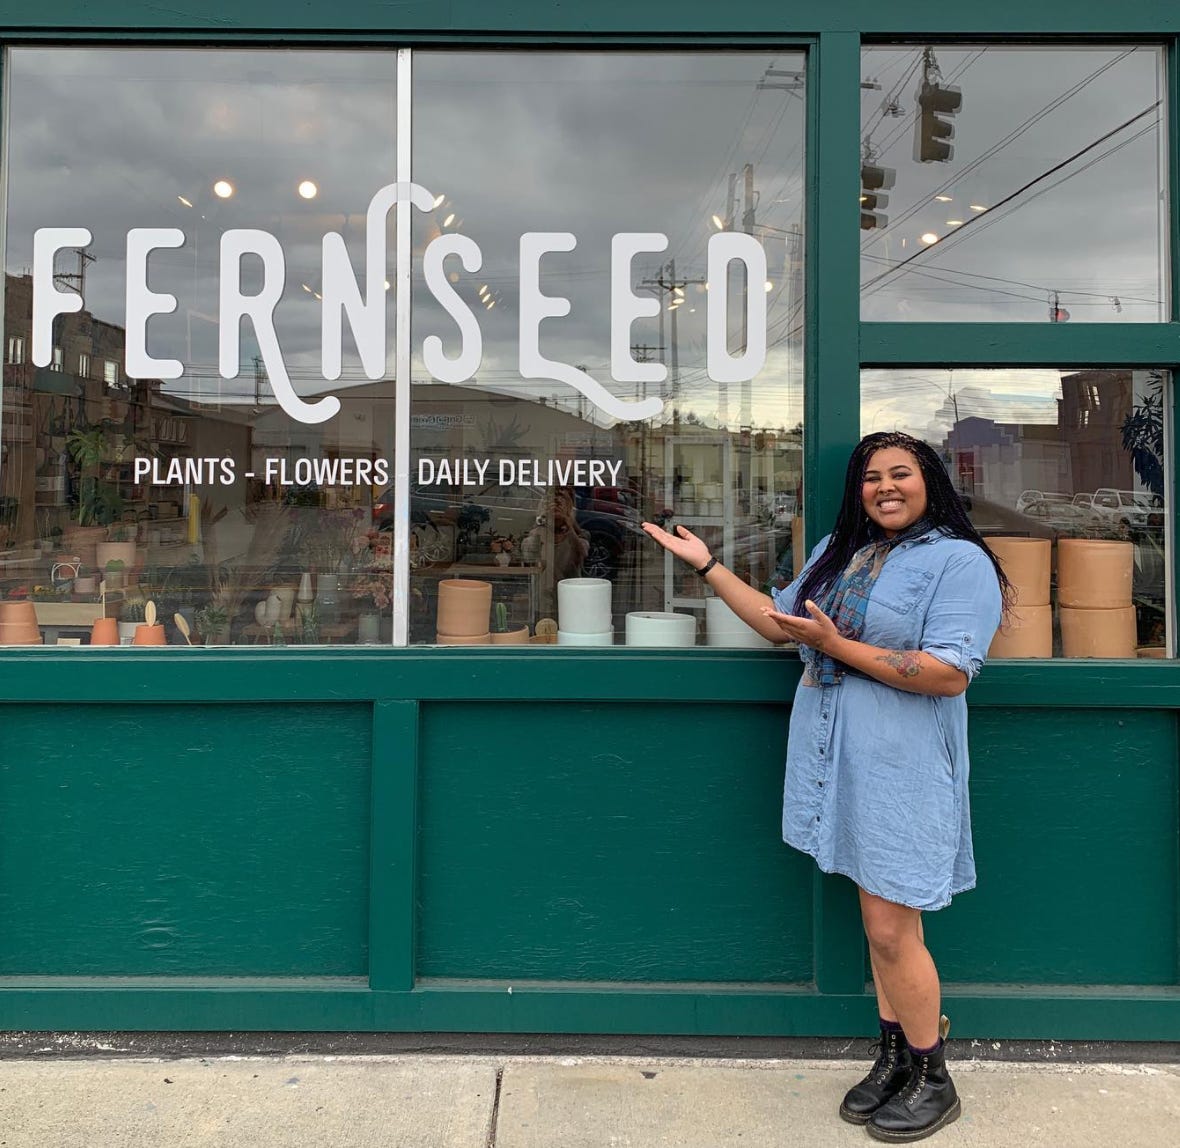 person smiling standing in front of fernseed shop